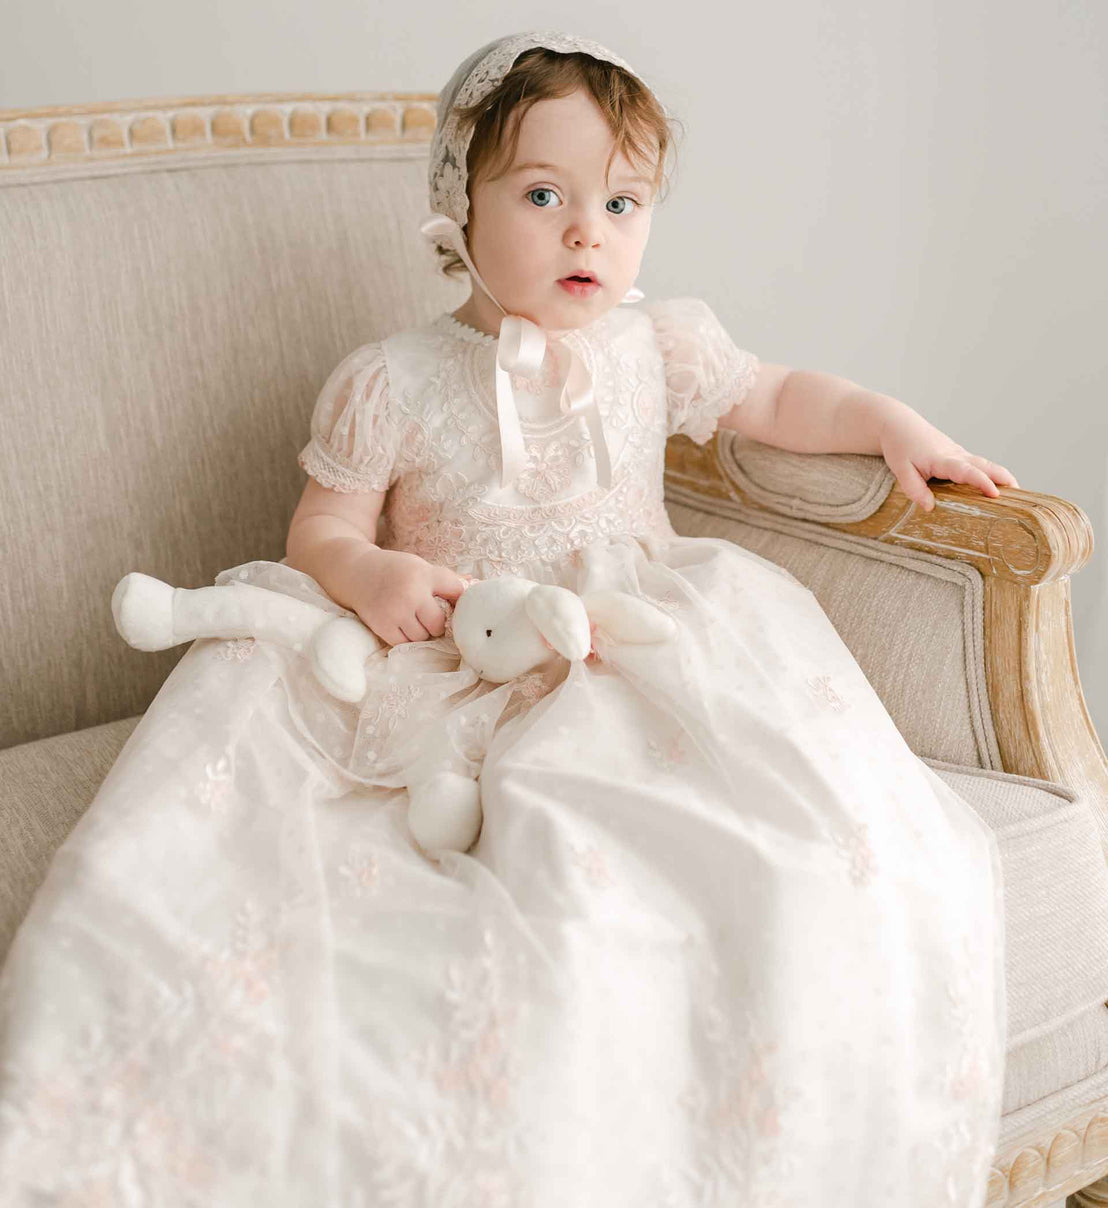 A baby girl in the Elizabeth Christening Gown & Bonnet sits on a beige sofa, holding the Elizabeth Silly Bunny Buddy, a white stuffed bunny.